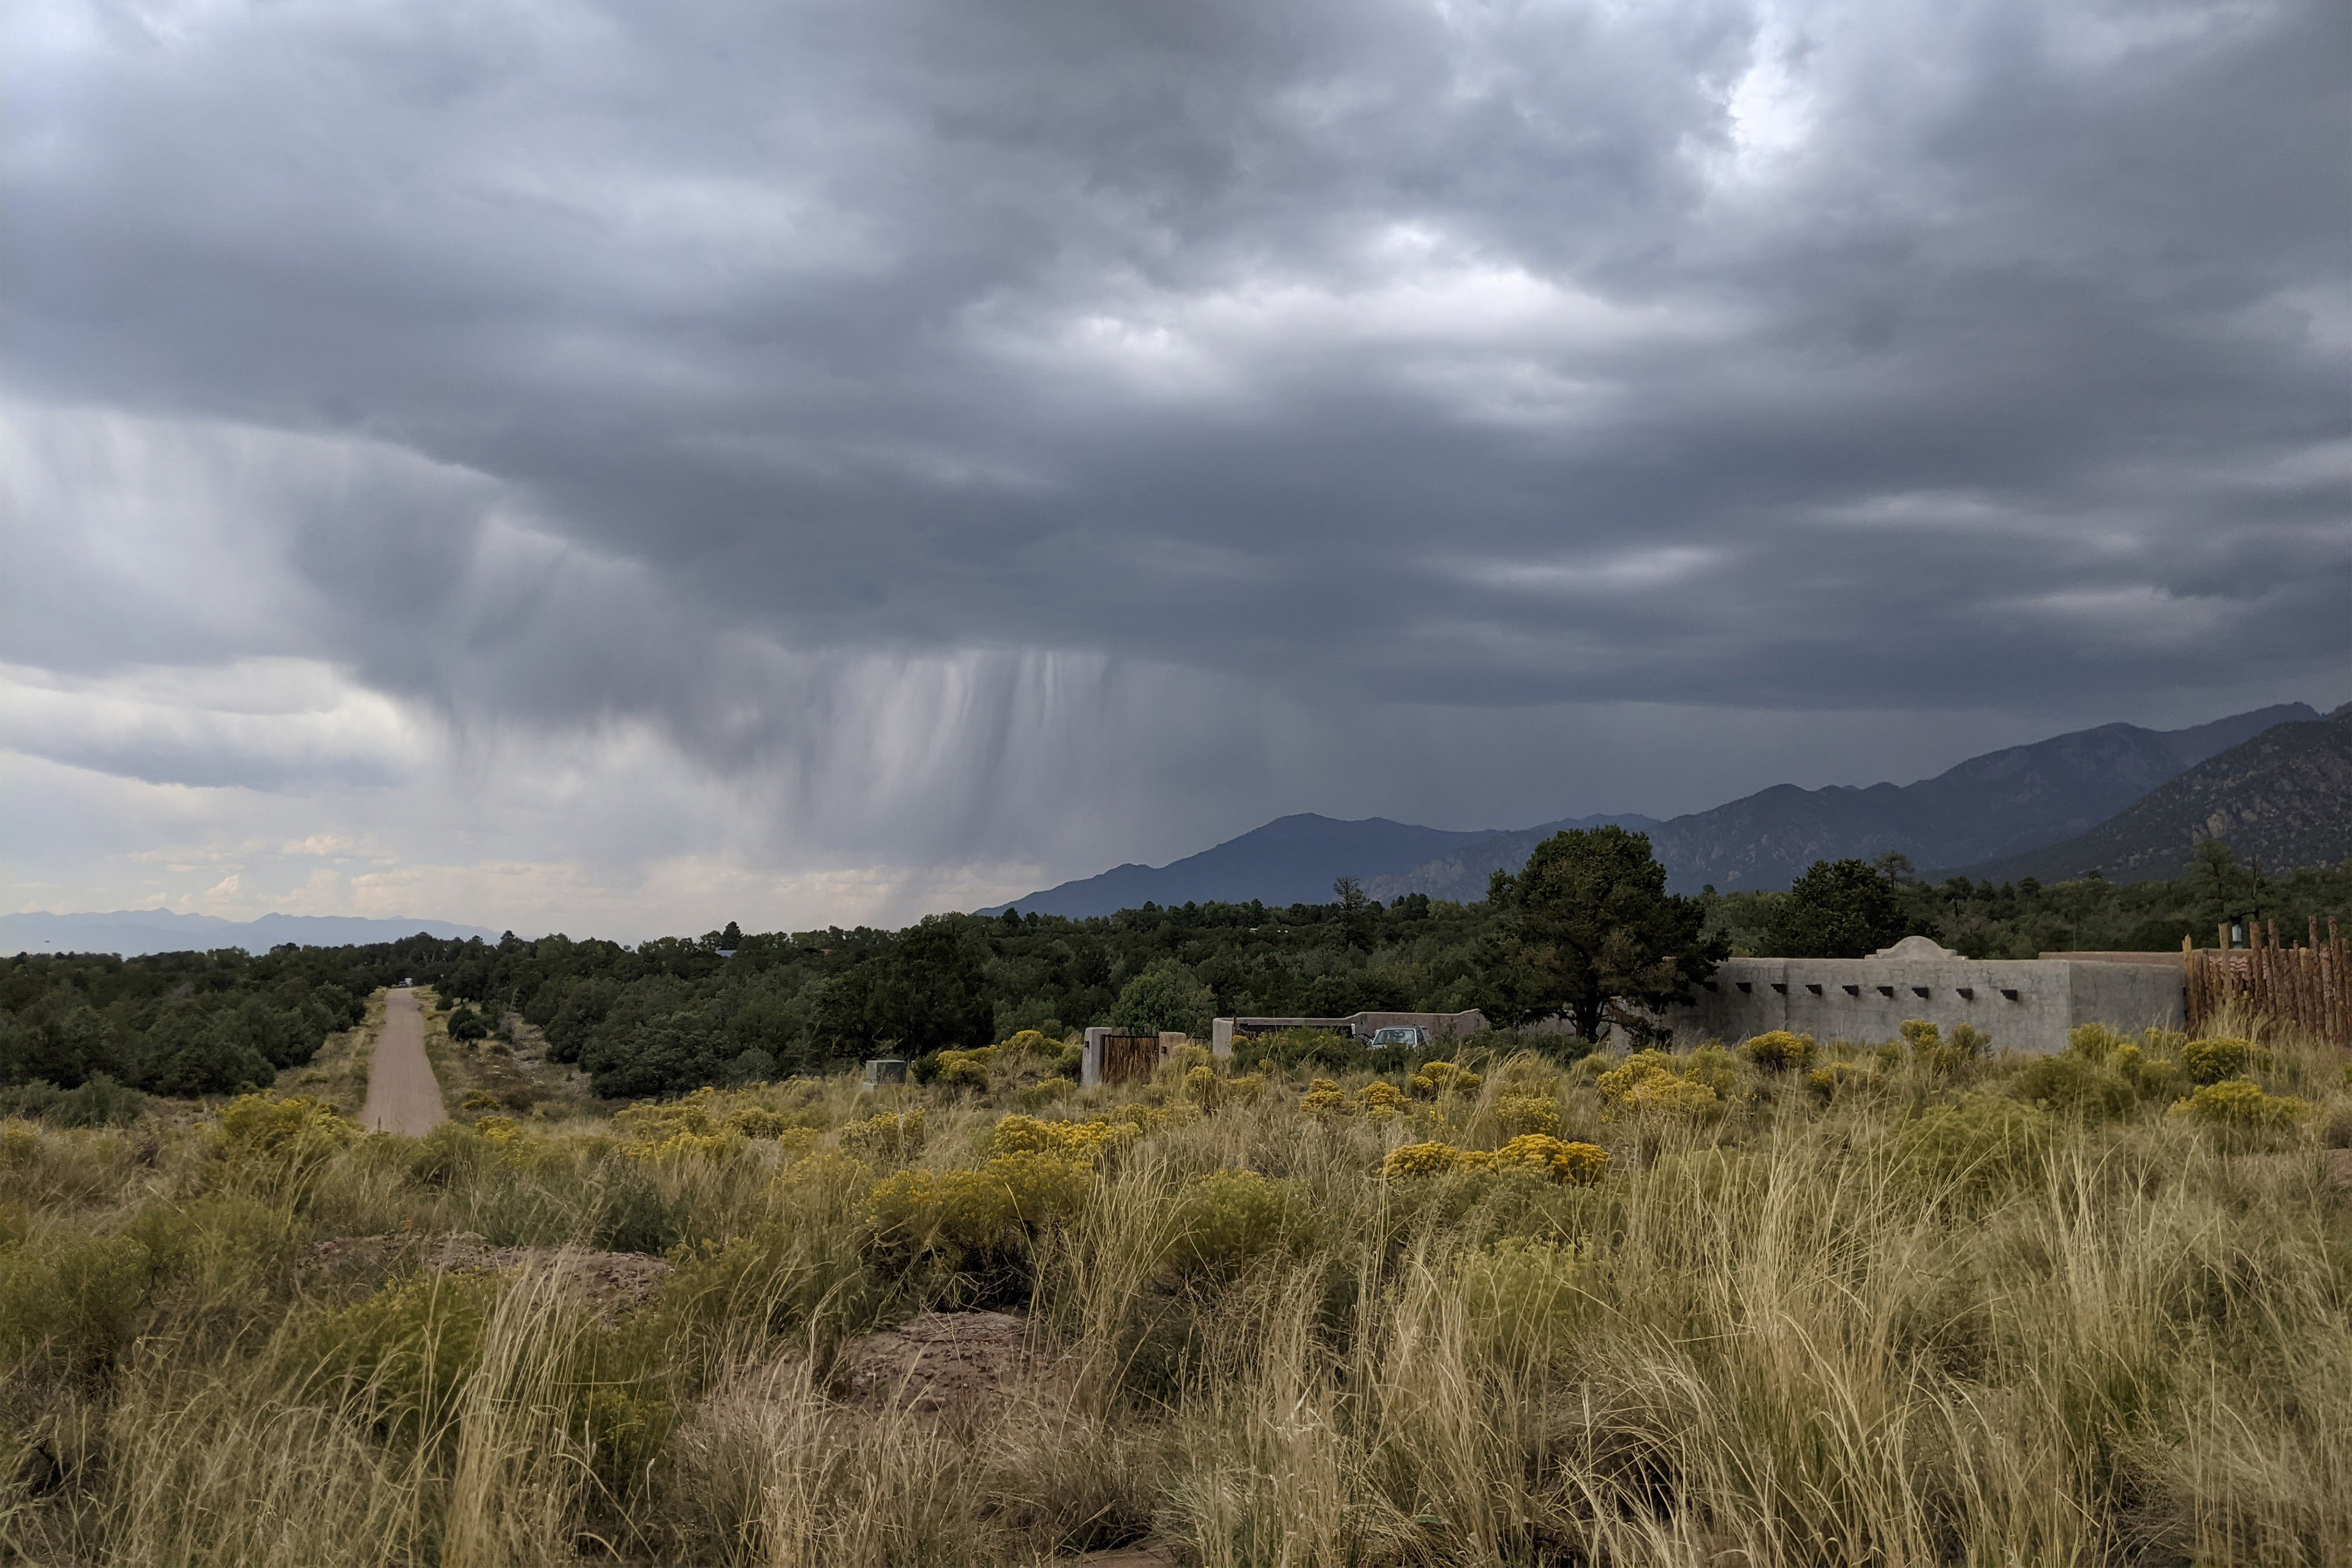 A photo of dark storm clouds hovering over mountains seen in the distance.